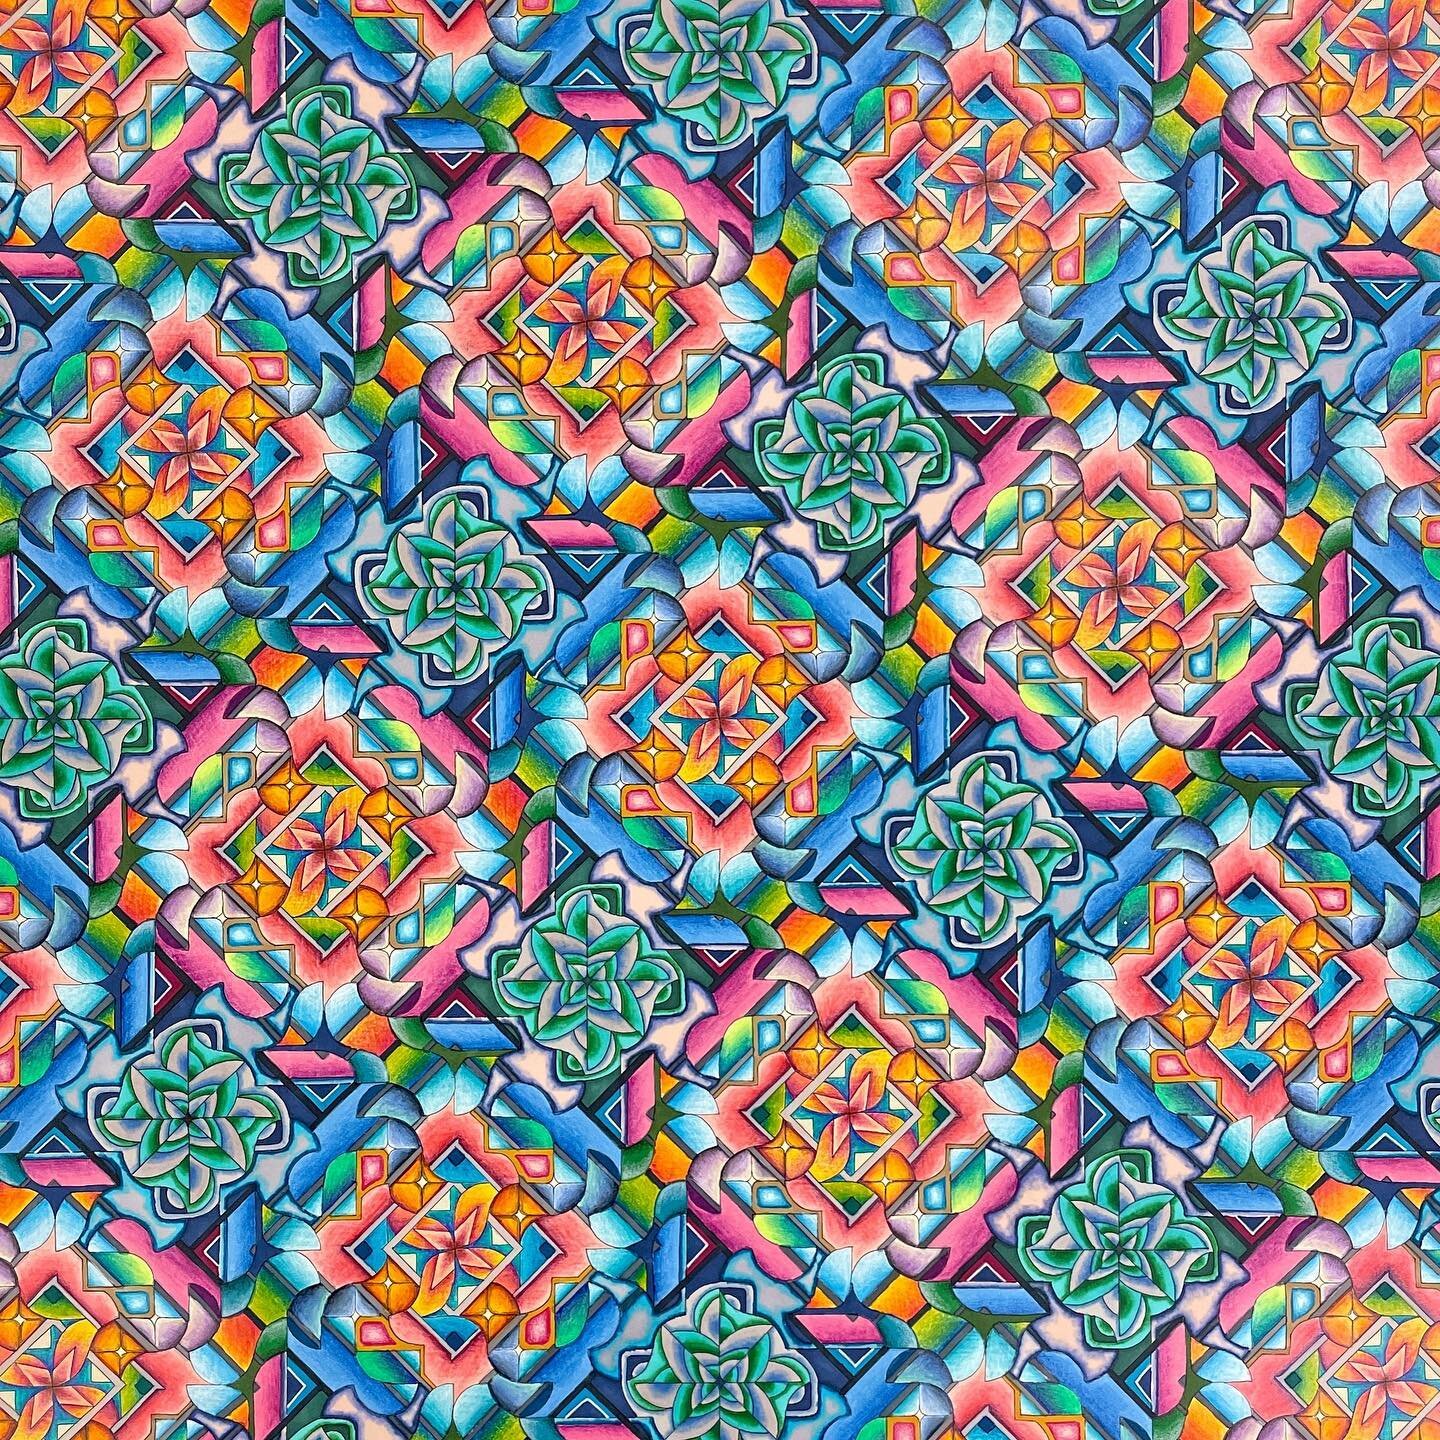 From 2 years ago today 🙂
Tessellated pattern design using Ink and Colored Pencil on paper.
Swipe over to see the &ldquo;coloring book&rdquo; version of the pattern before color.
 

#art #artwork #pattern #patterndesign #surfacepattern #surfacepatter